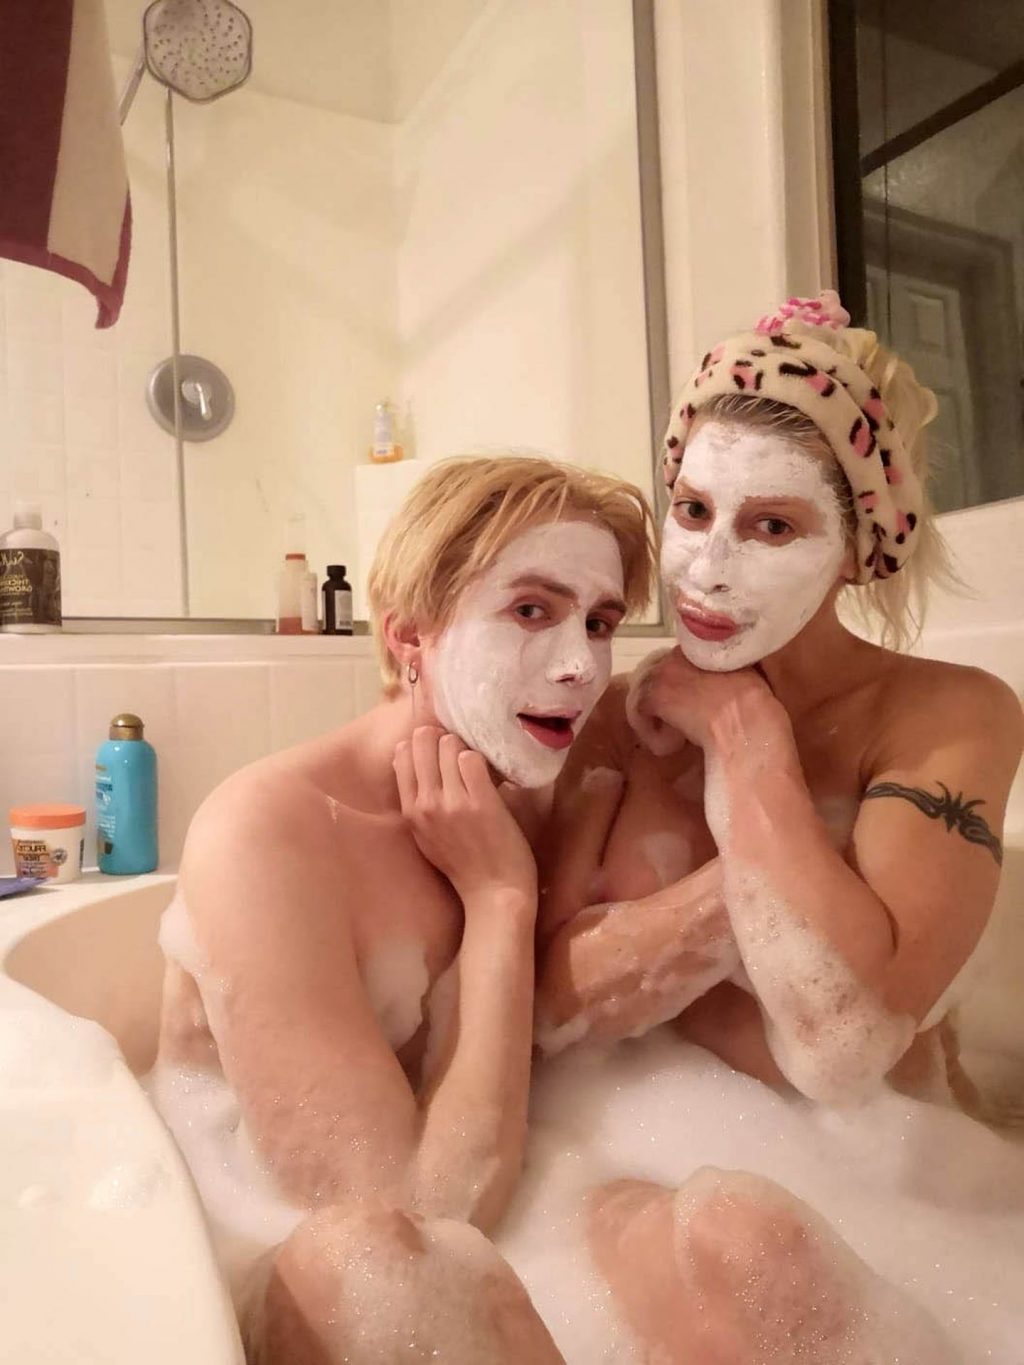 Frenchy Morgan &amp; Oli London Have a Personal Spa Day (6 Photos)